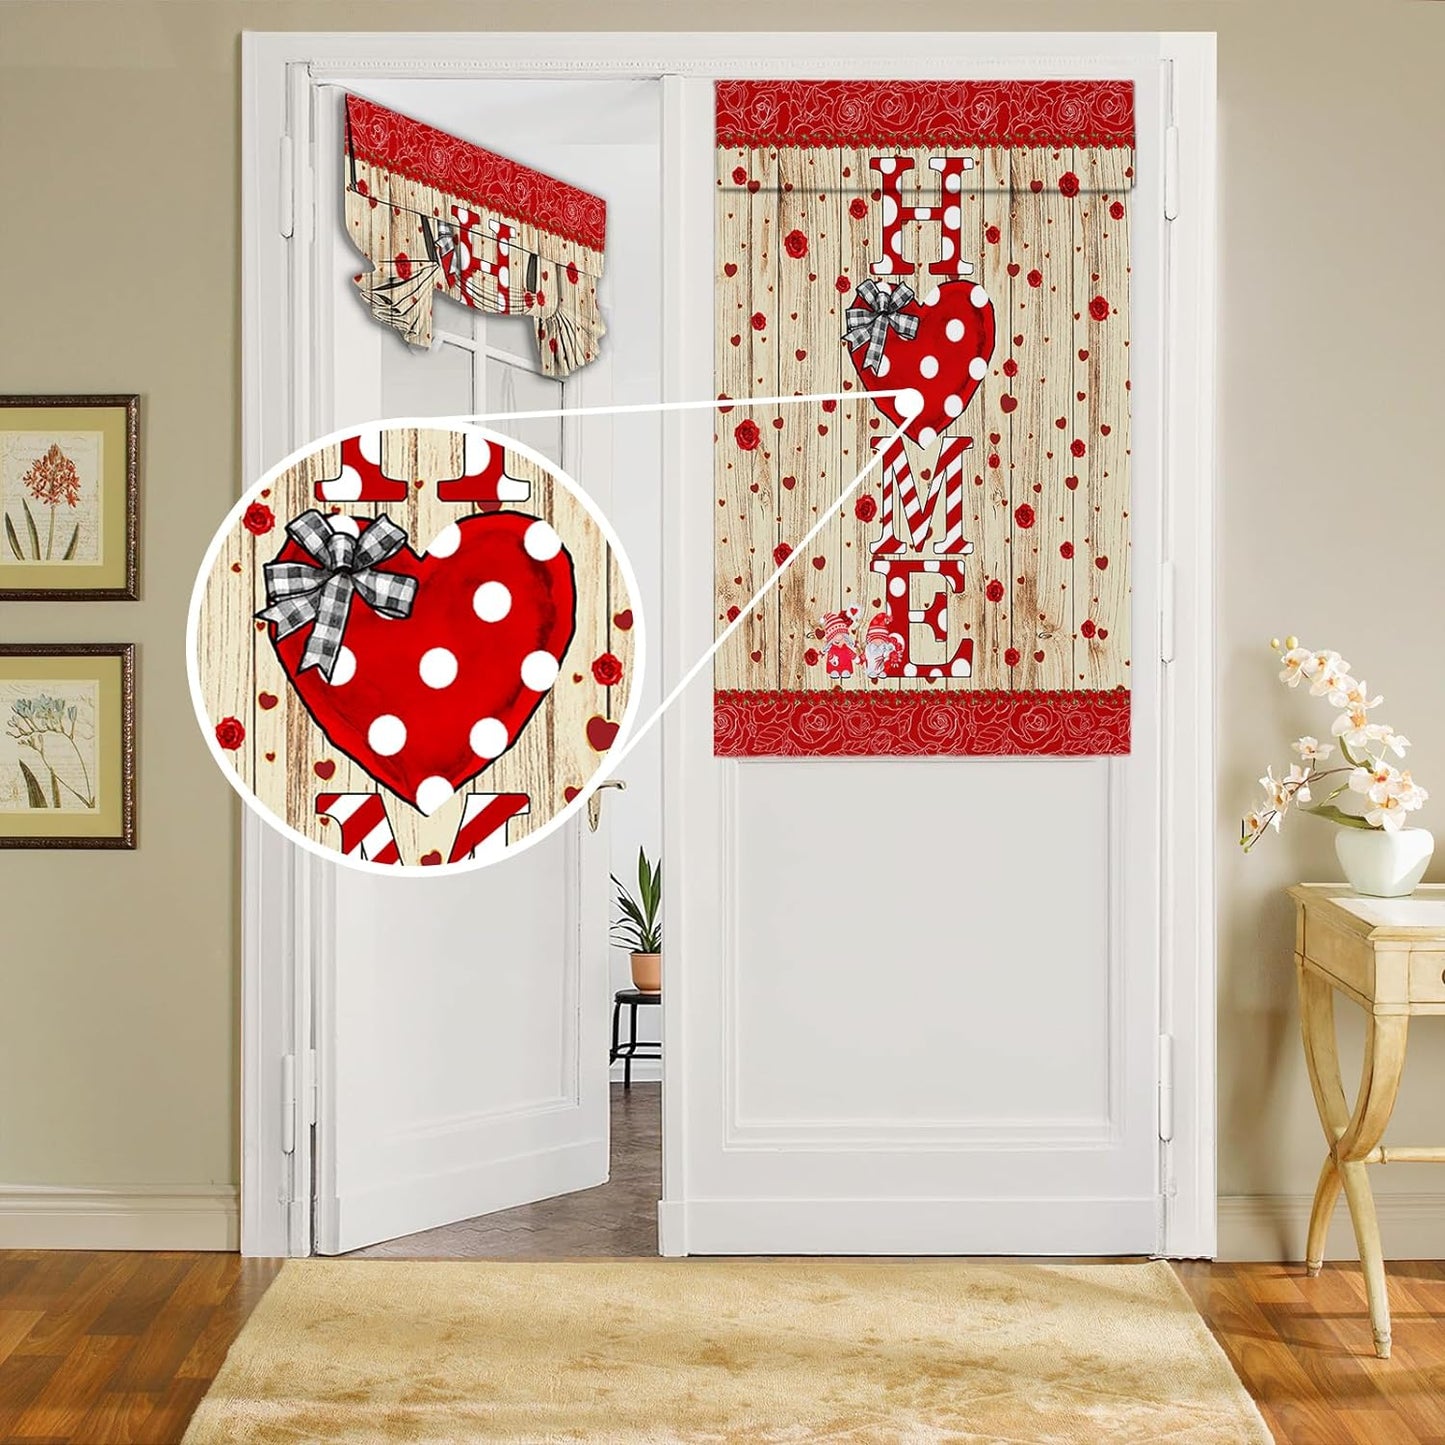 BEMIGO Door Curtains for Door Windows, Vintage Wooden Door Window Curtains for French Glass Door, Privacy Thermal Insulated Tie up Door Shades, Farmhouse Colorful Small Window Curtains 26 X 42 Inch  BEMIGO Red Valentine 42.00" X 26.00" 